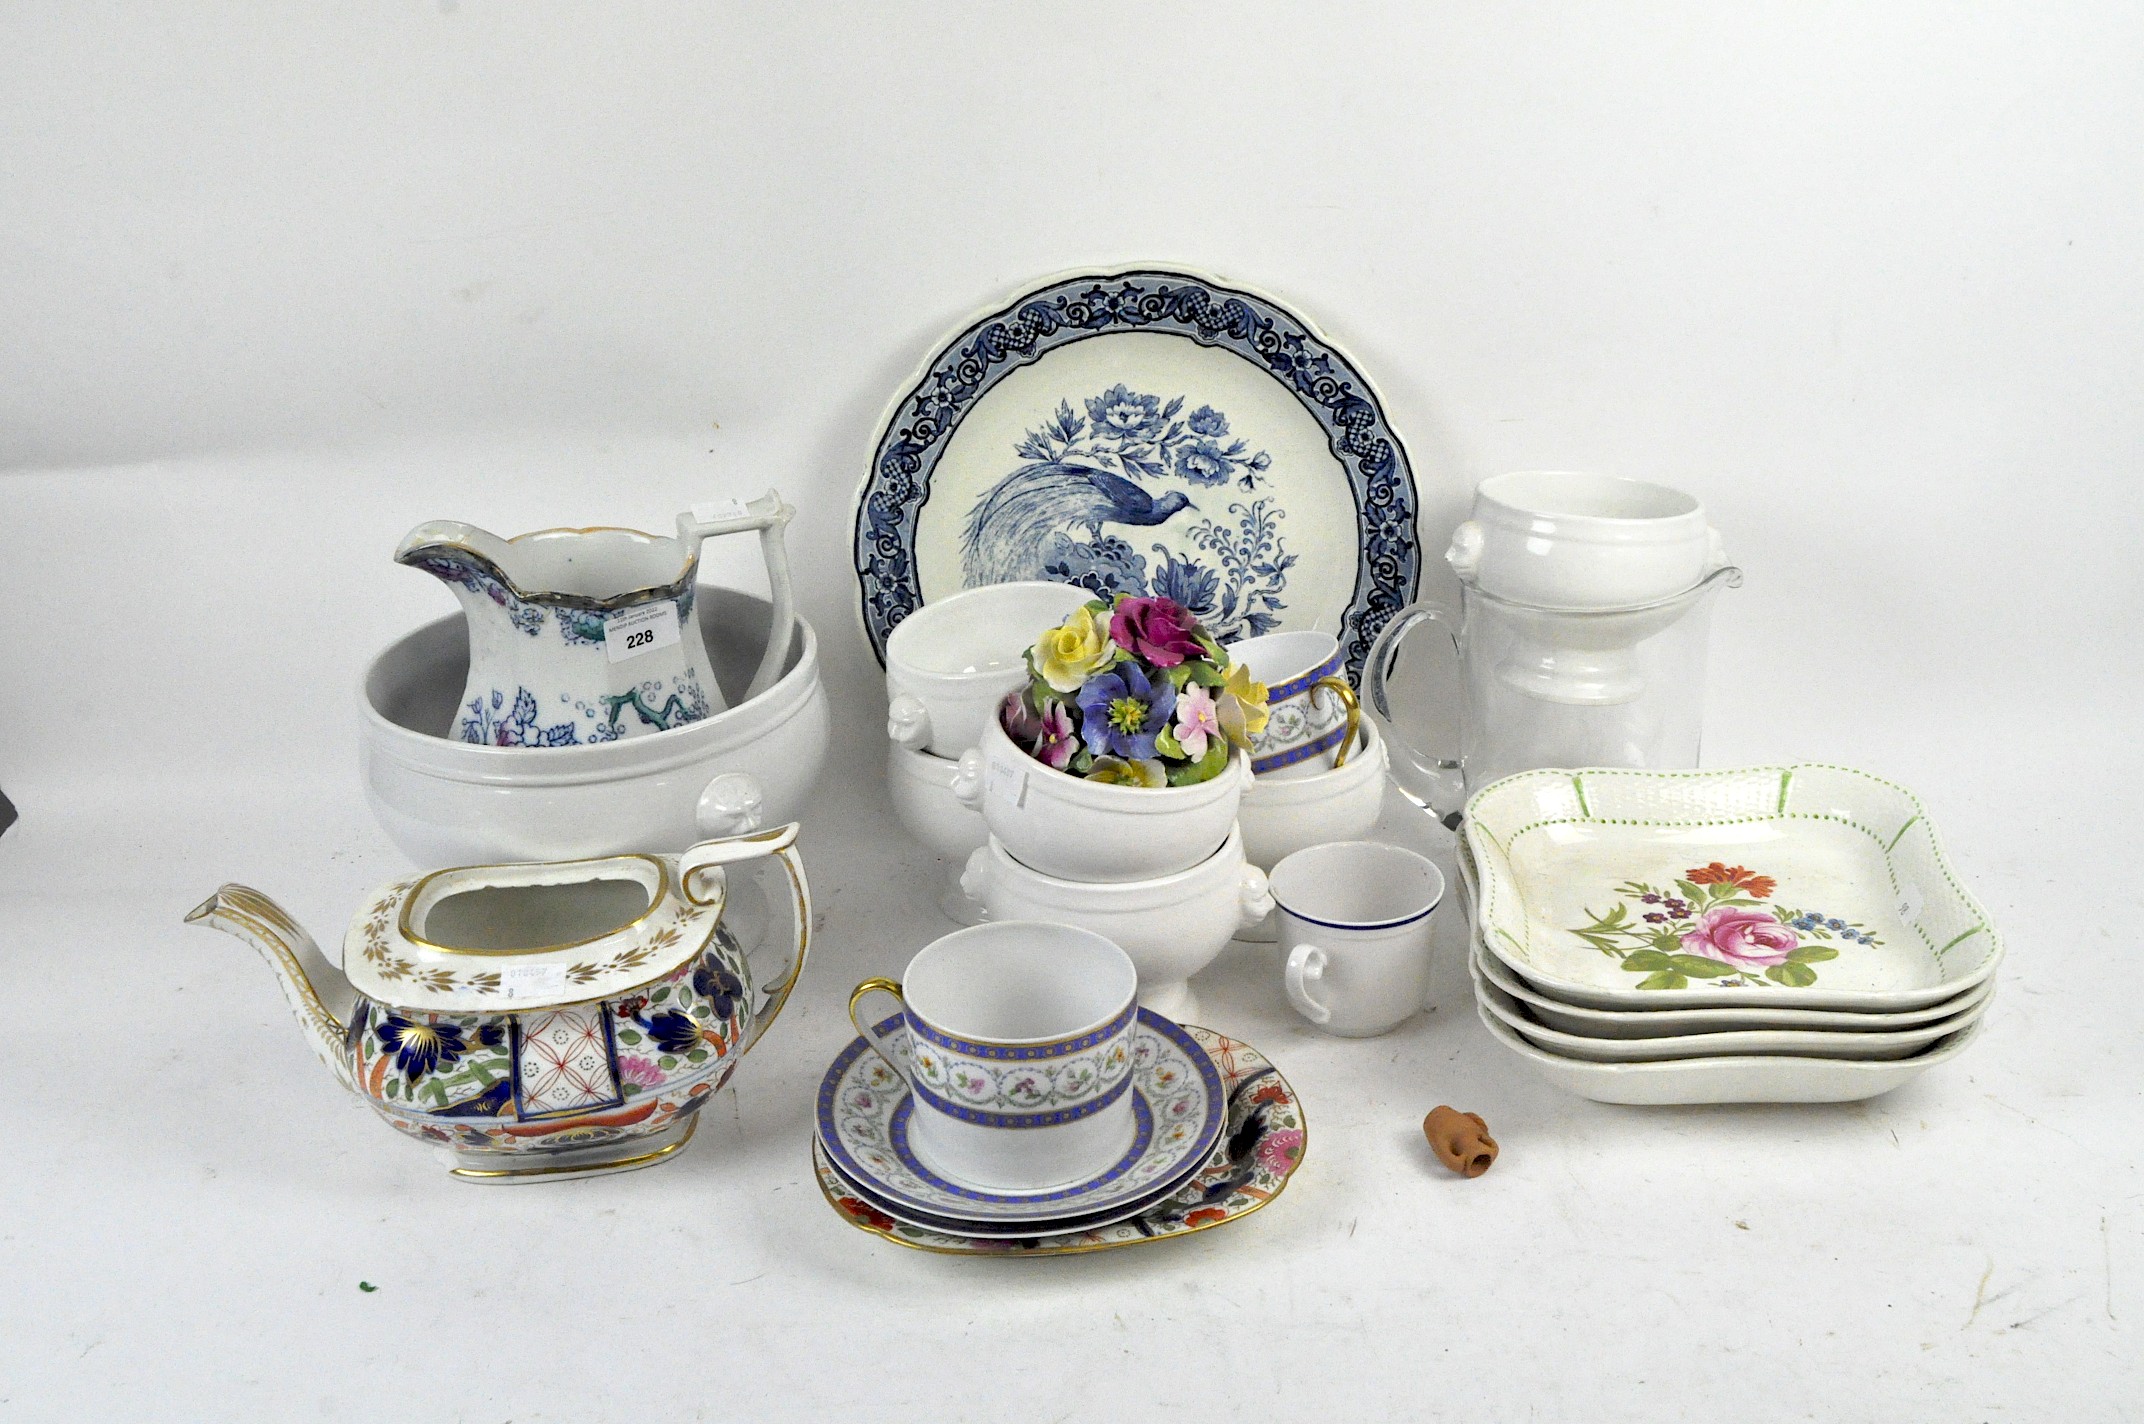 A collection of 20th century and later ceramics, including Wedgwood floral dishes, Limoges, and more